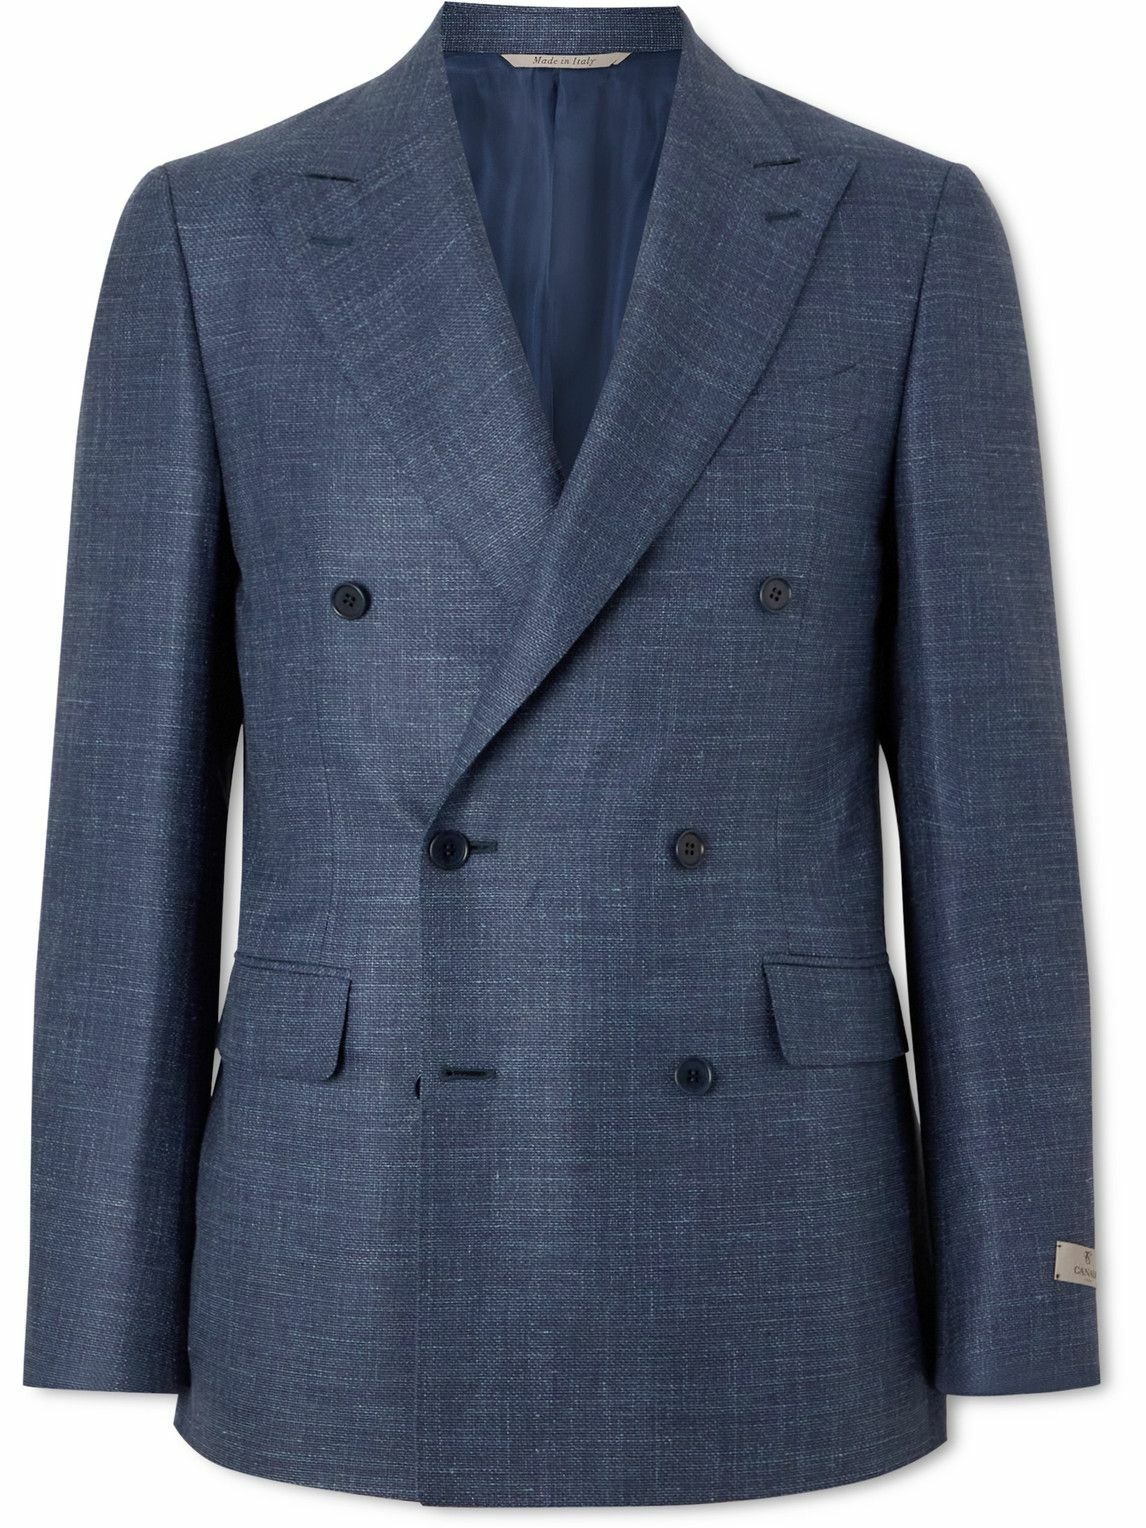 Canali - Double-Breasted Wool, Silk and Linen-Blend Blazer - Blue Canali